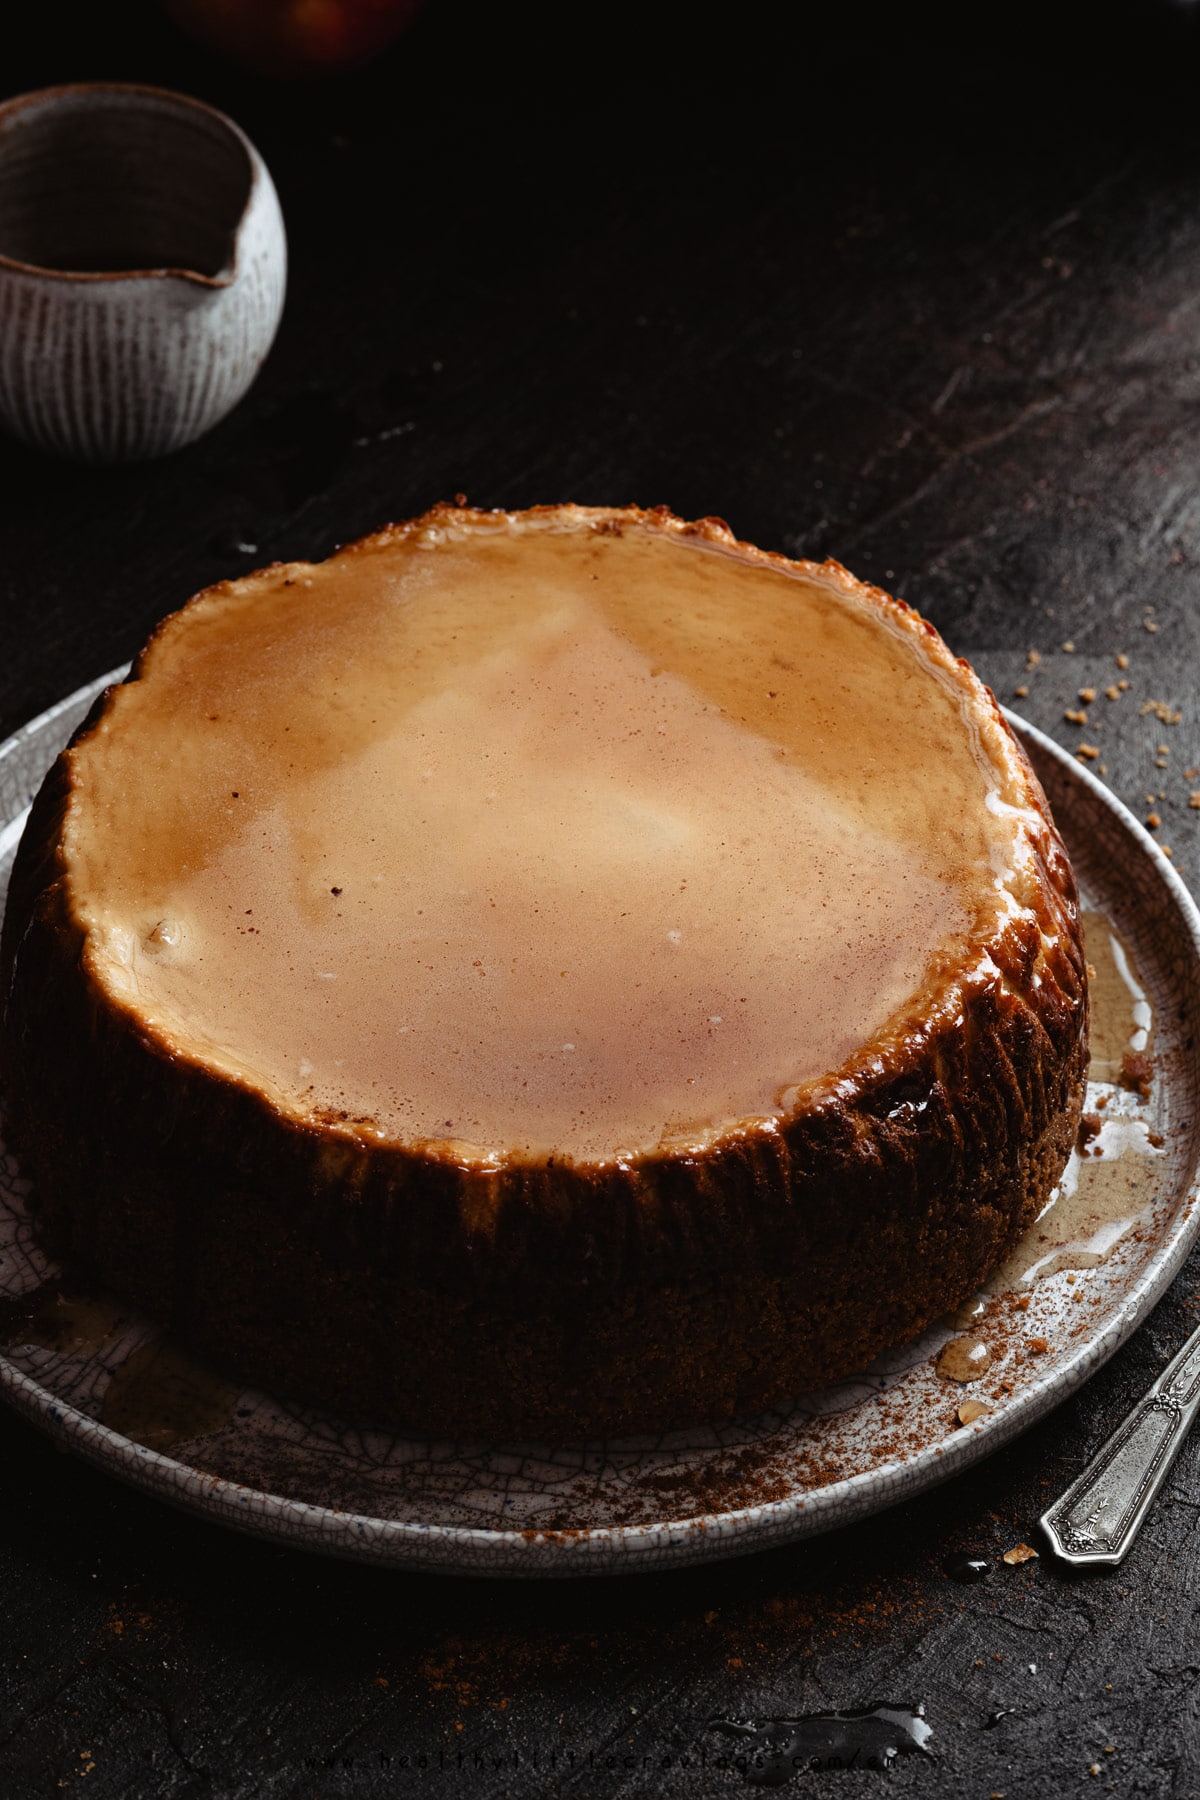 Delicious caramel apple cheesecake with a layer of caramel.